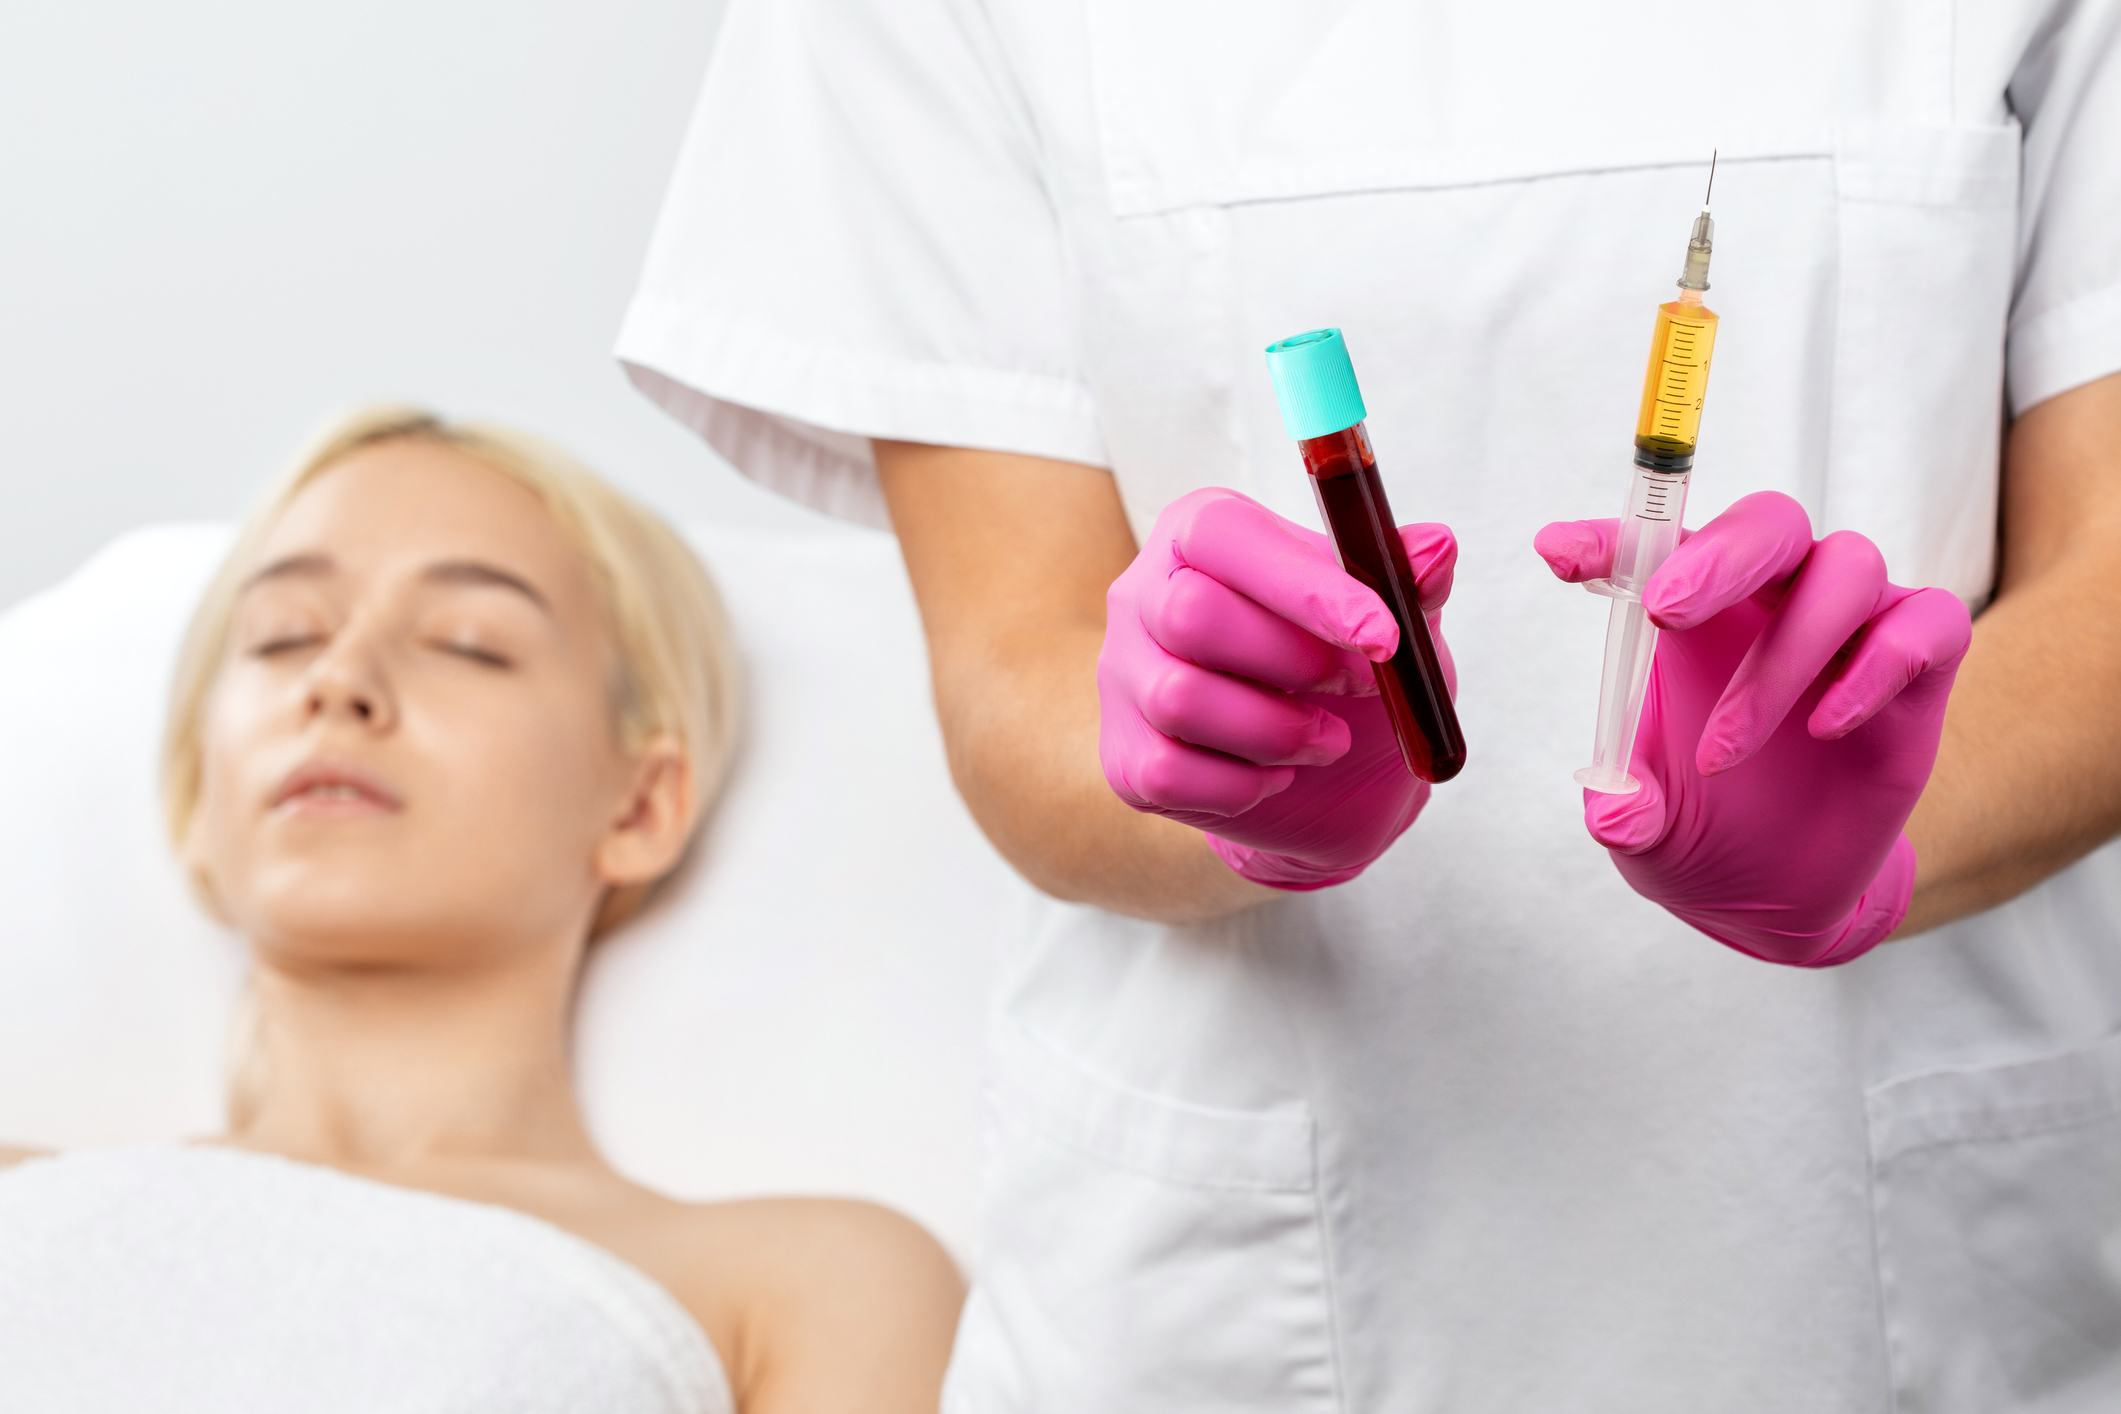 Beautician Will Do Prp Therapy For The Face Against Wrinkles. She Has Blood Plasma For Injections And A Syringe With Plasma In Her Test Tube. Cosmetology In The Beauty Salon.